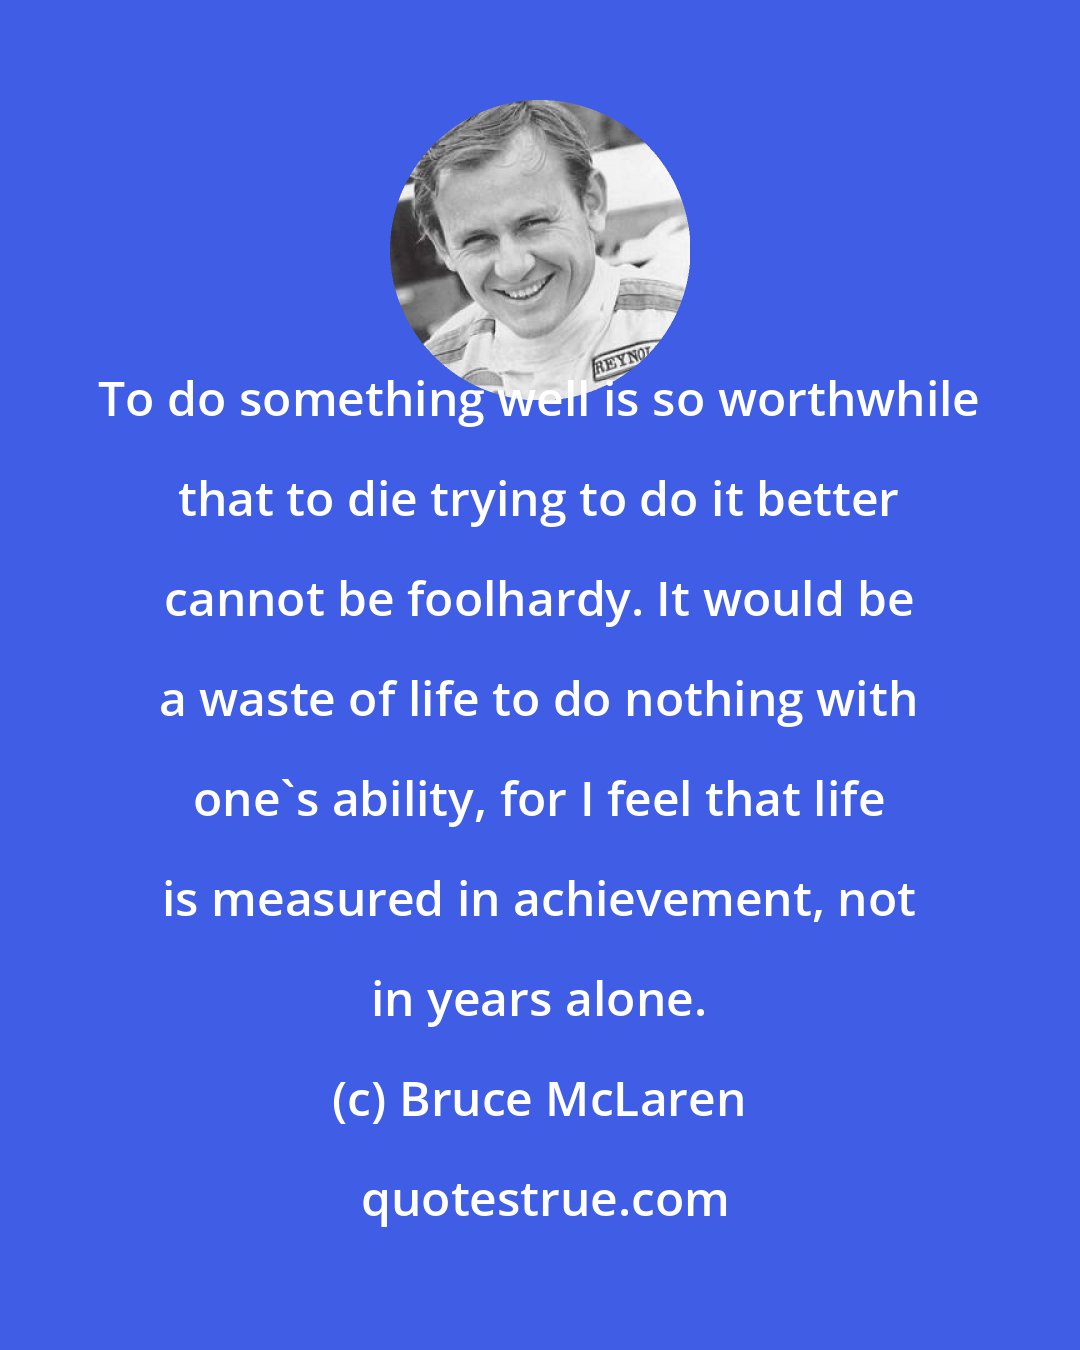 Bruce McLaren: To do something well is so worthwhile that to die trying to do it better cannot be foolhardy. It would be a waste of life to do nothing with one's ability, for I feel that life is measured in achievement, not in years alone.